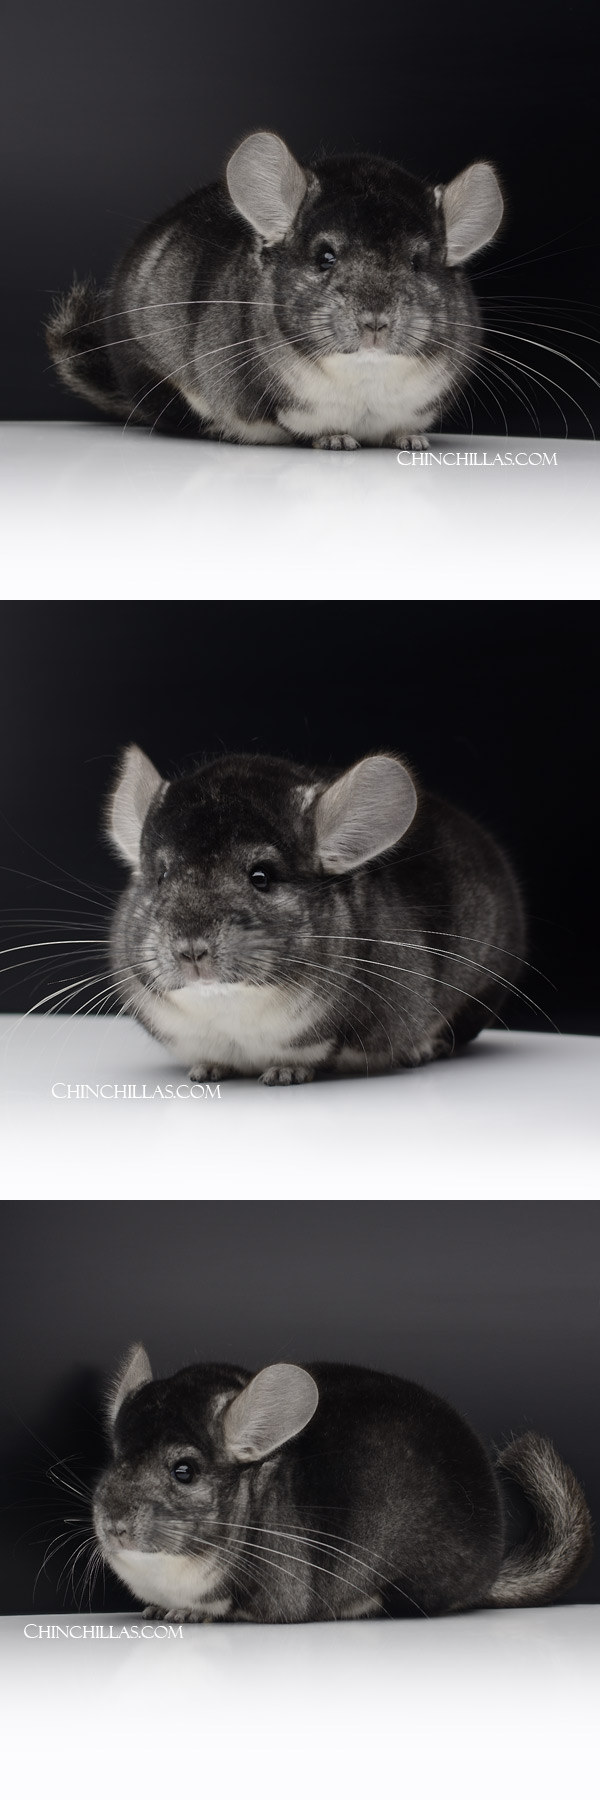 Chinchilla or related item offered for sale or export on Chinchillas.com - 24054 Reserve Class Champion Standard Male Chinchilla